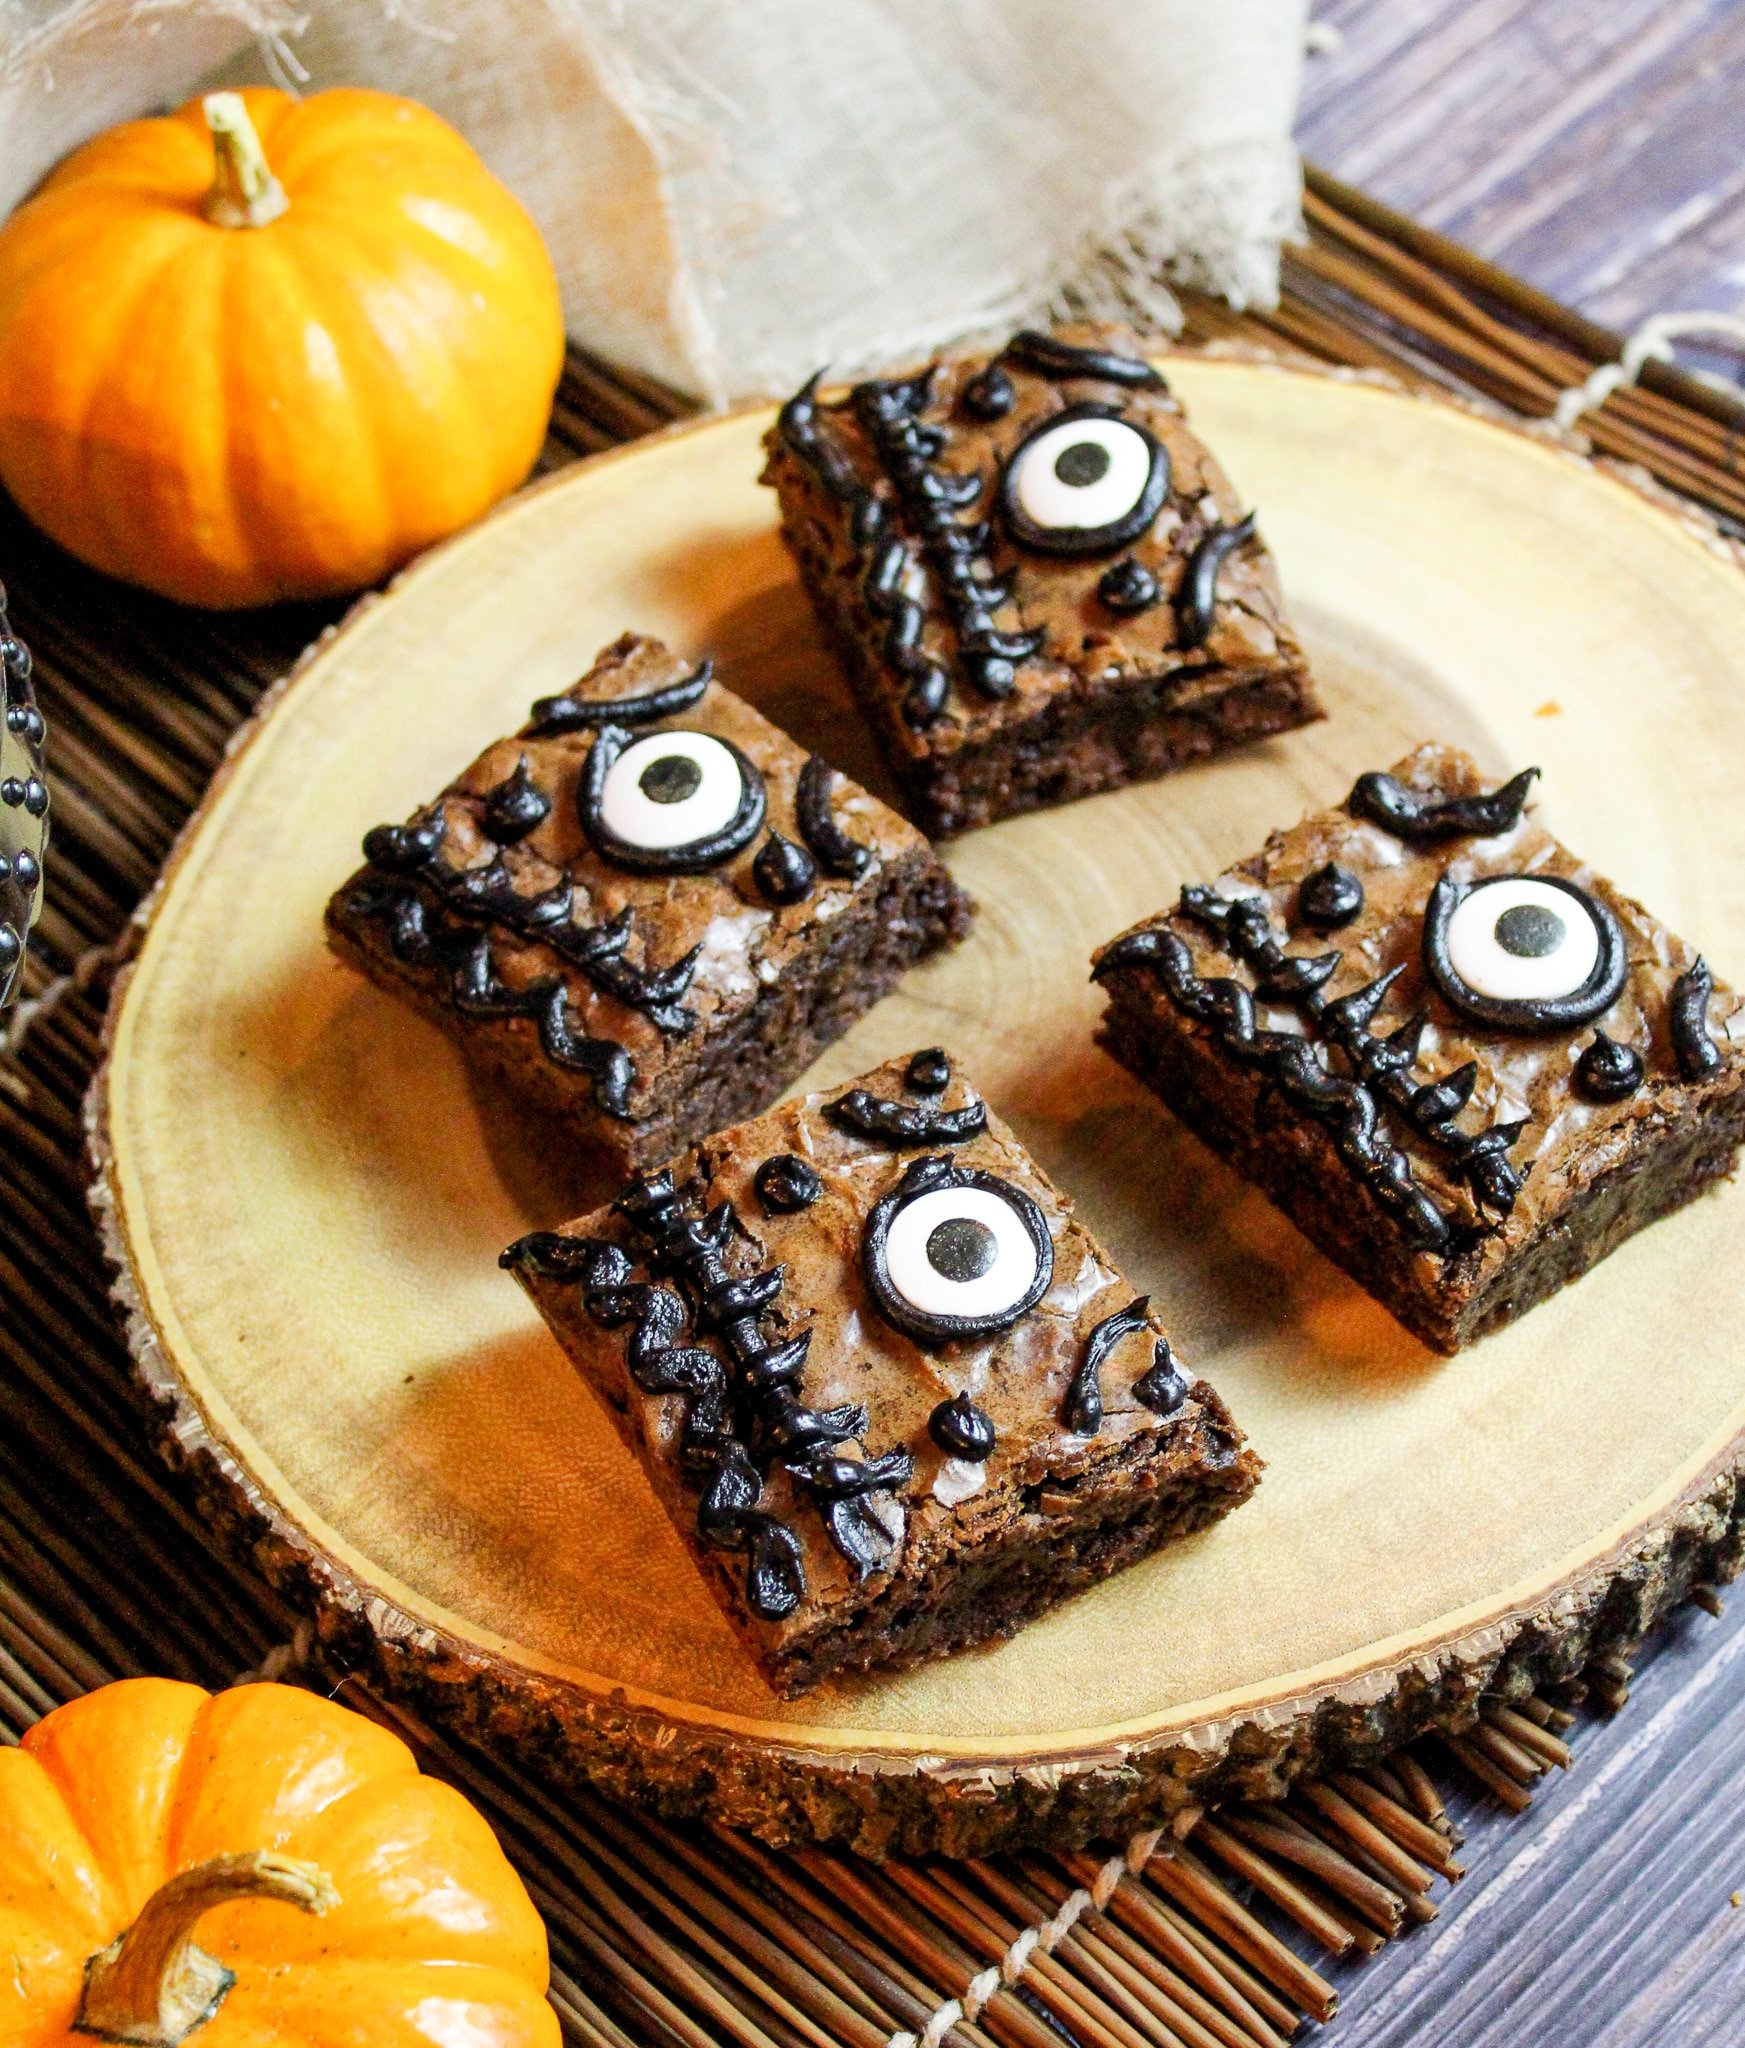 Brownies on a wooden board. They have been decorated to look like Hocus Pocus spell books.